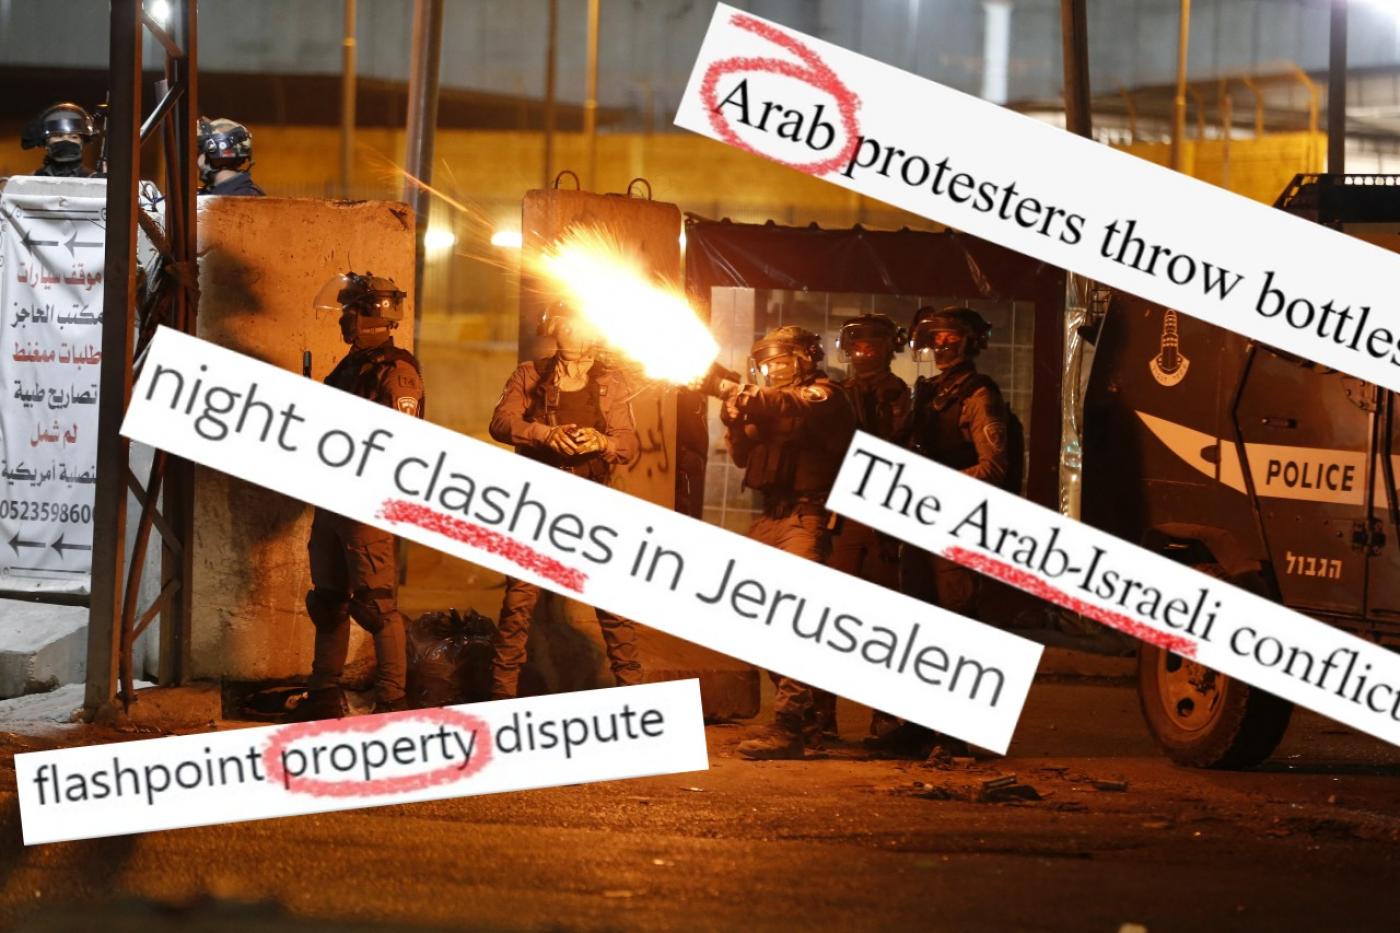 The language used by media to report on events in Israel and Palestine has come under scrutiny (AFP/screengrabs)